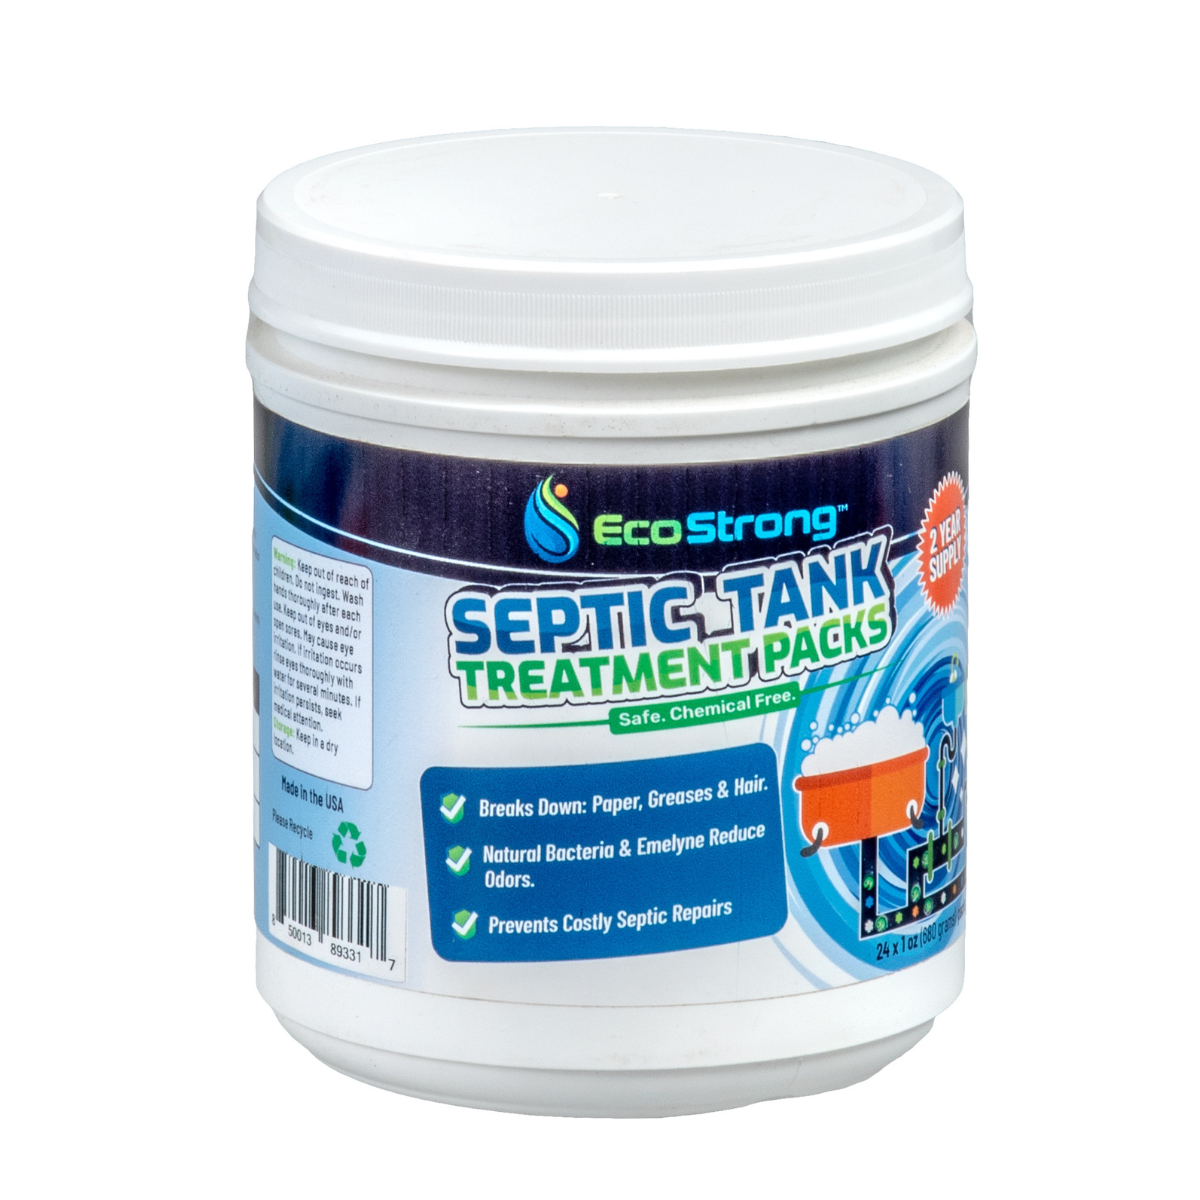 EcoStrong Septic Tank Treatment Packs#size_24-x-1-oz-packs